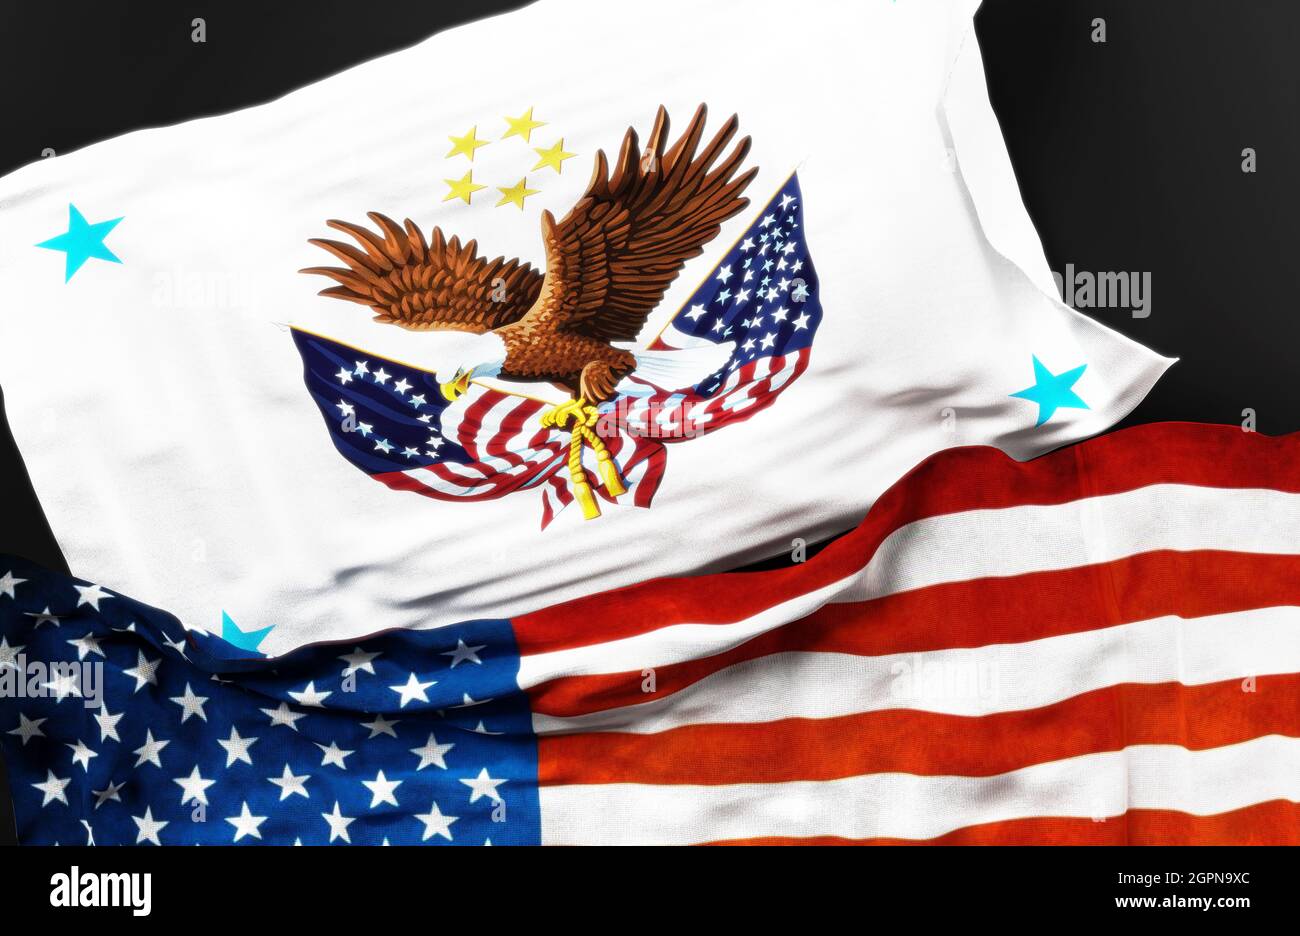 Flag of a United States Assistant Secretary of Veterans Affairs along with a flag of the United States of America as a symbol of unity between them, 3 Stock Photo